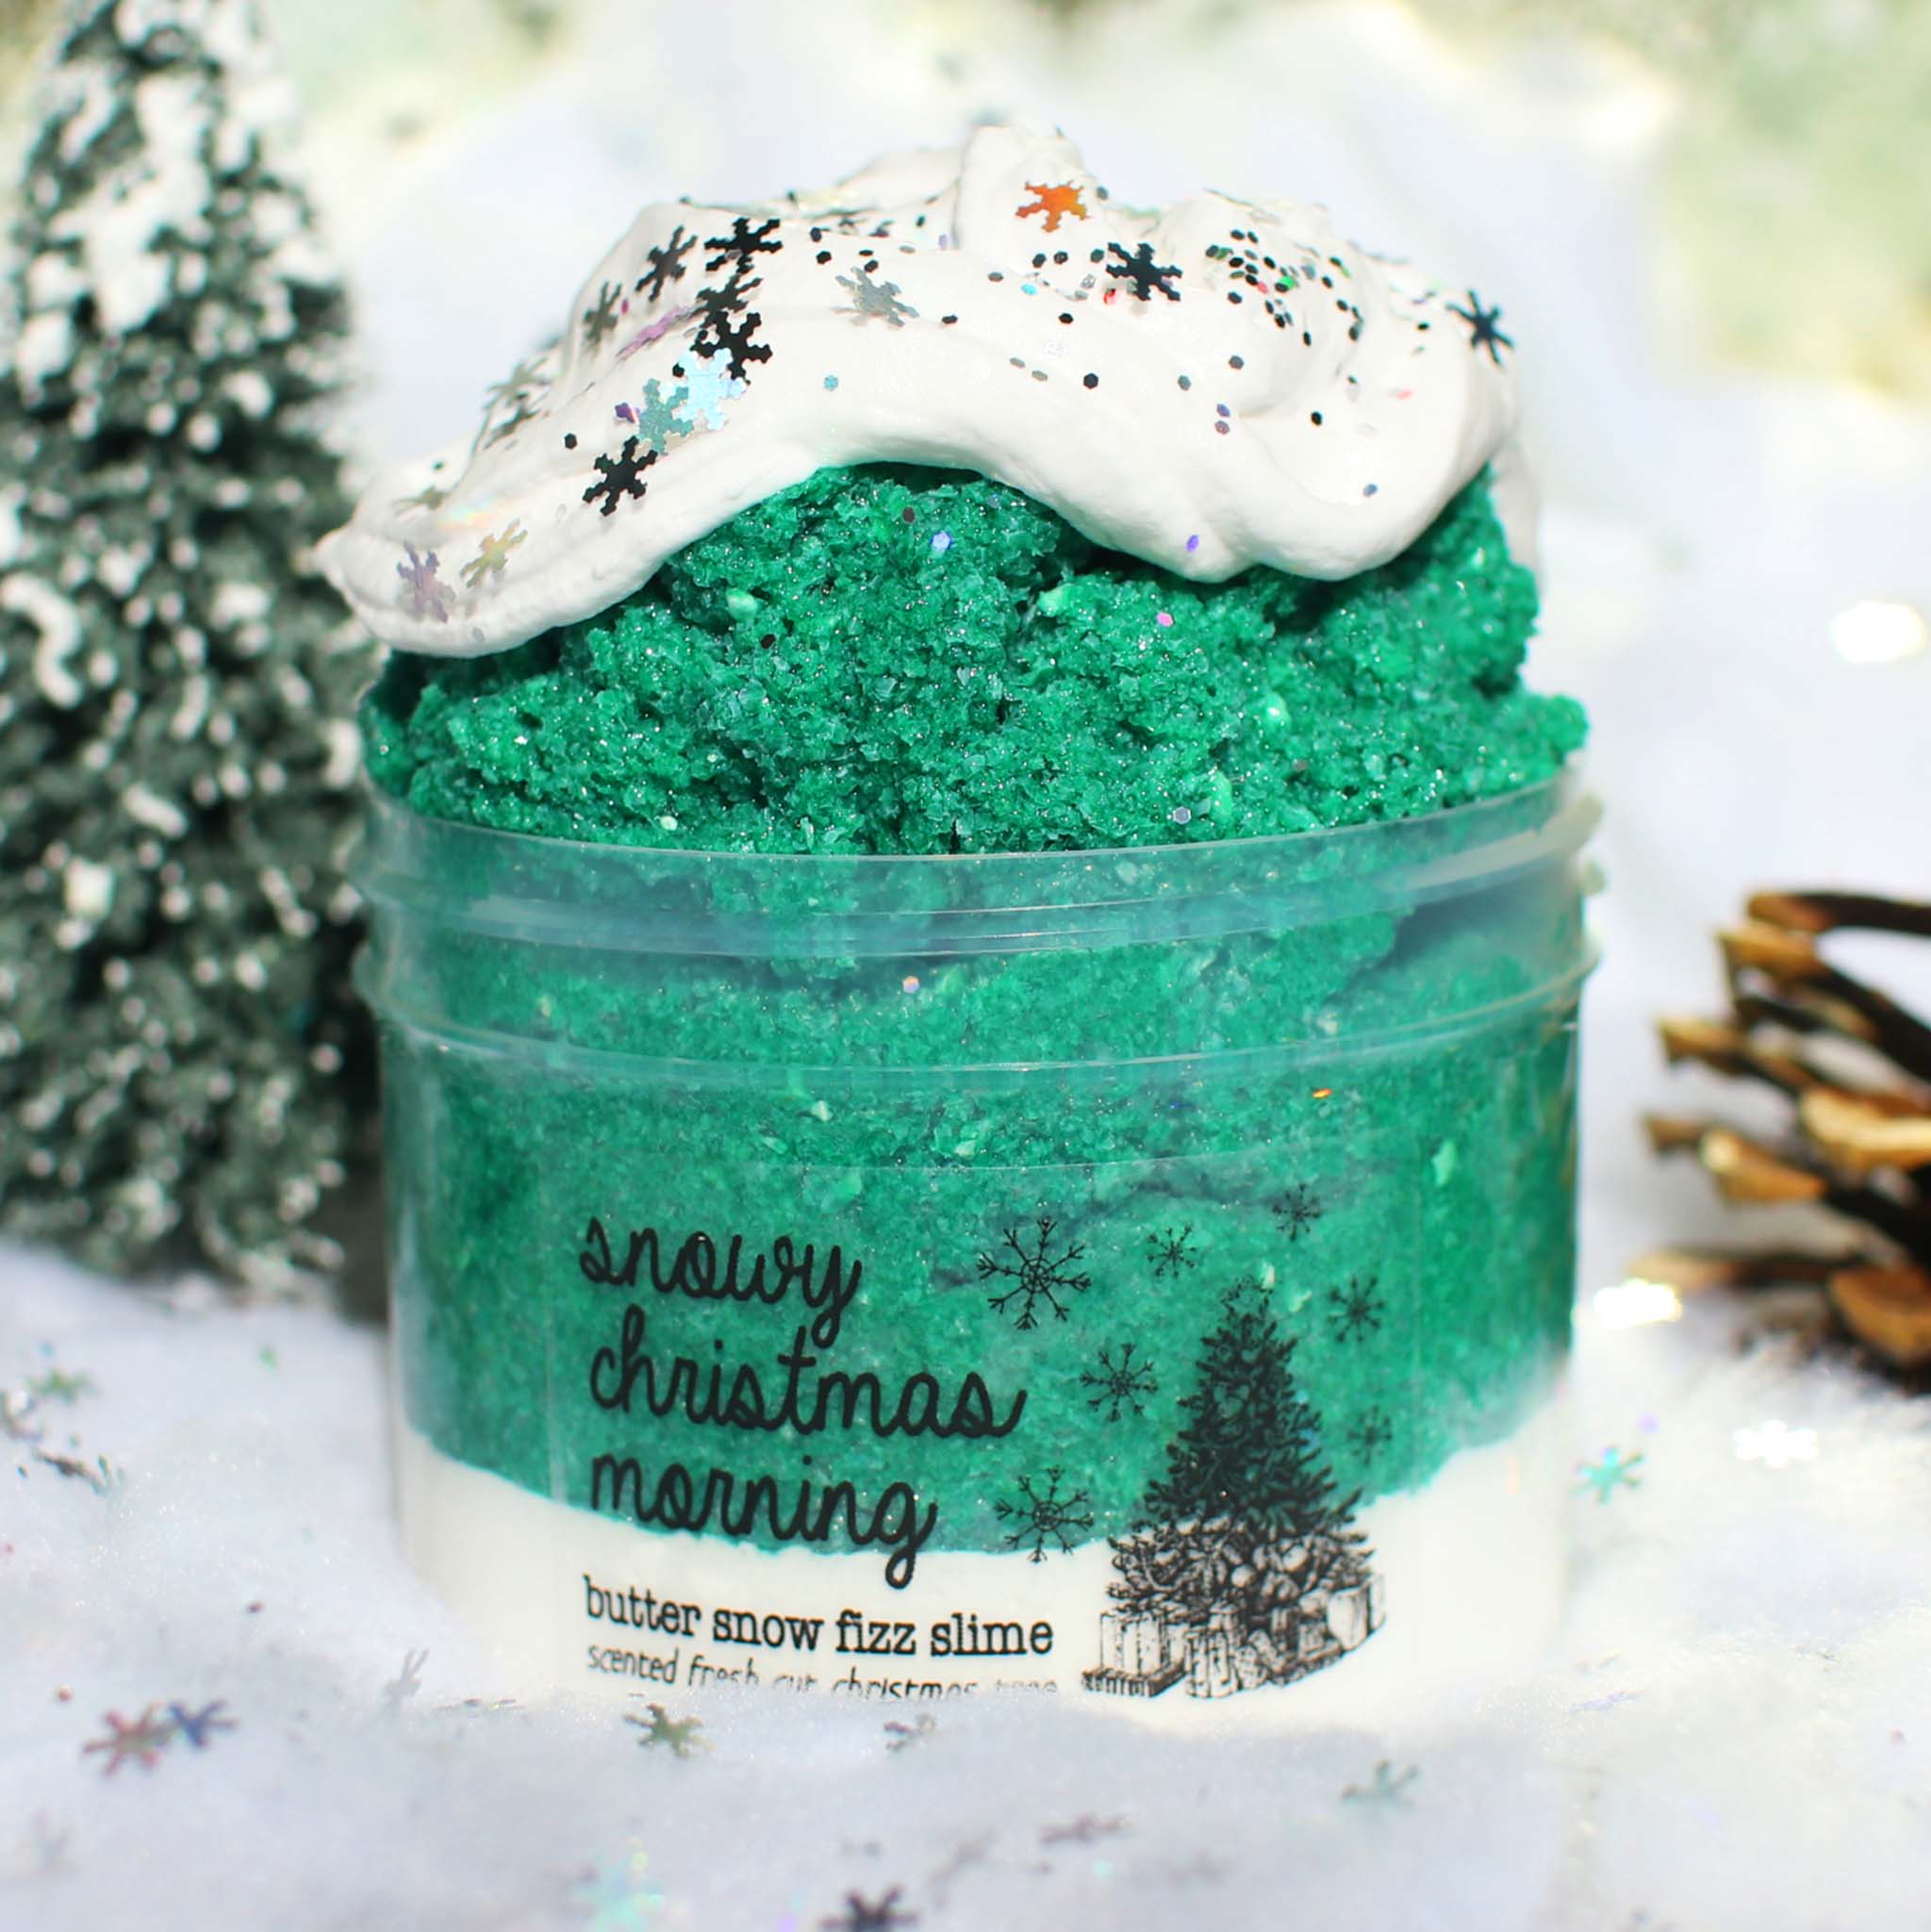 Snowy Christmas Morning Christmas Slime Gift For Kids Green White Tree Scented Clay Creamy Crunchy Butter Snow Fizz Slime Fantasies Shop 9oz Front View Decoration Closer